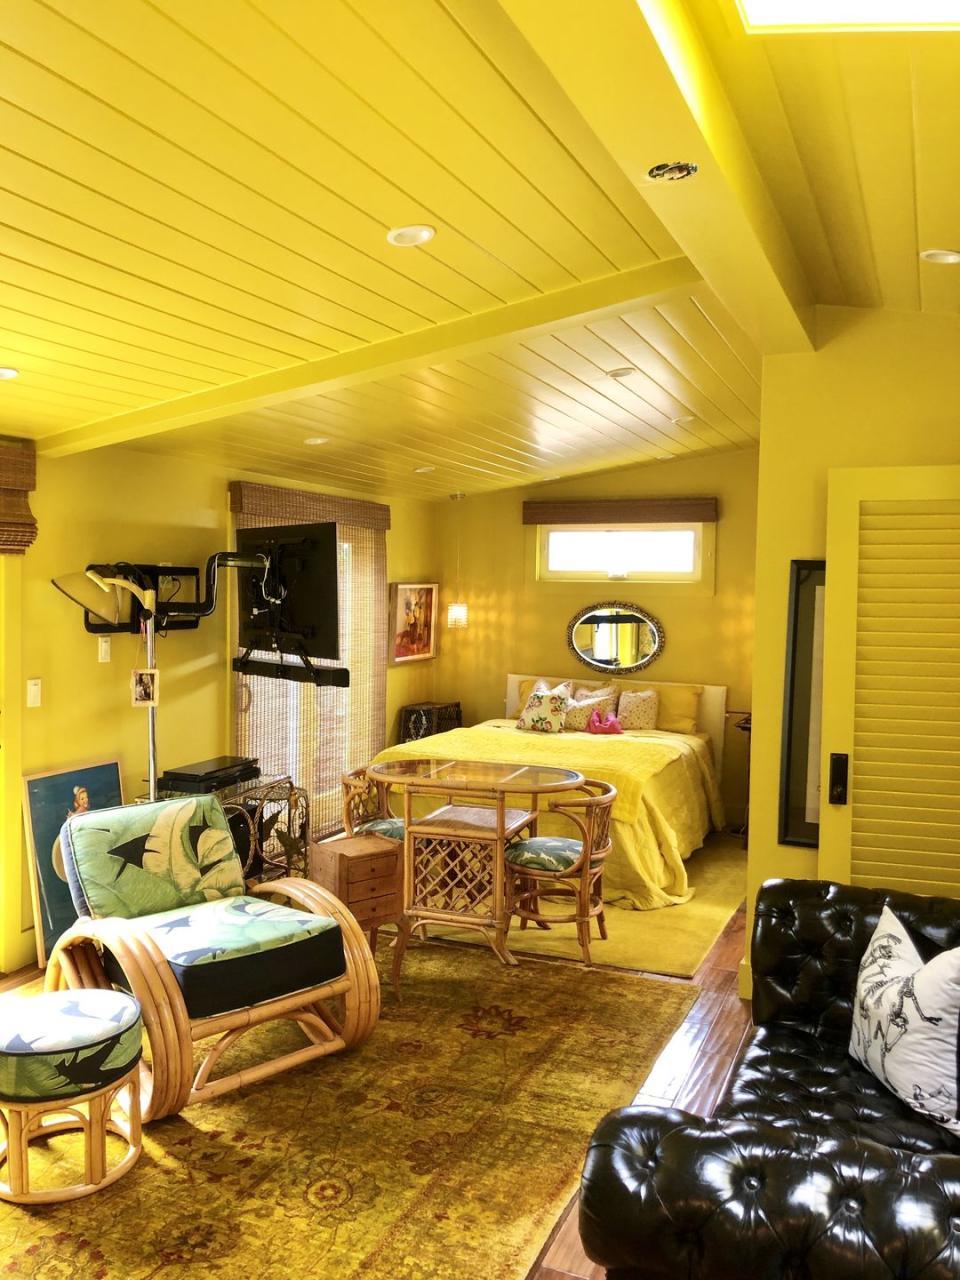 6) The "Yellow Room"